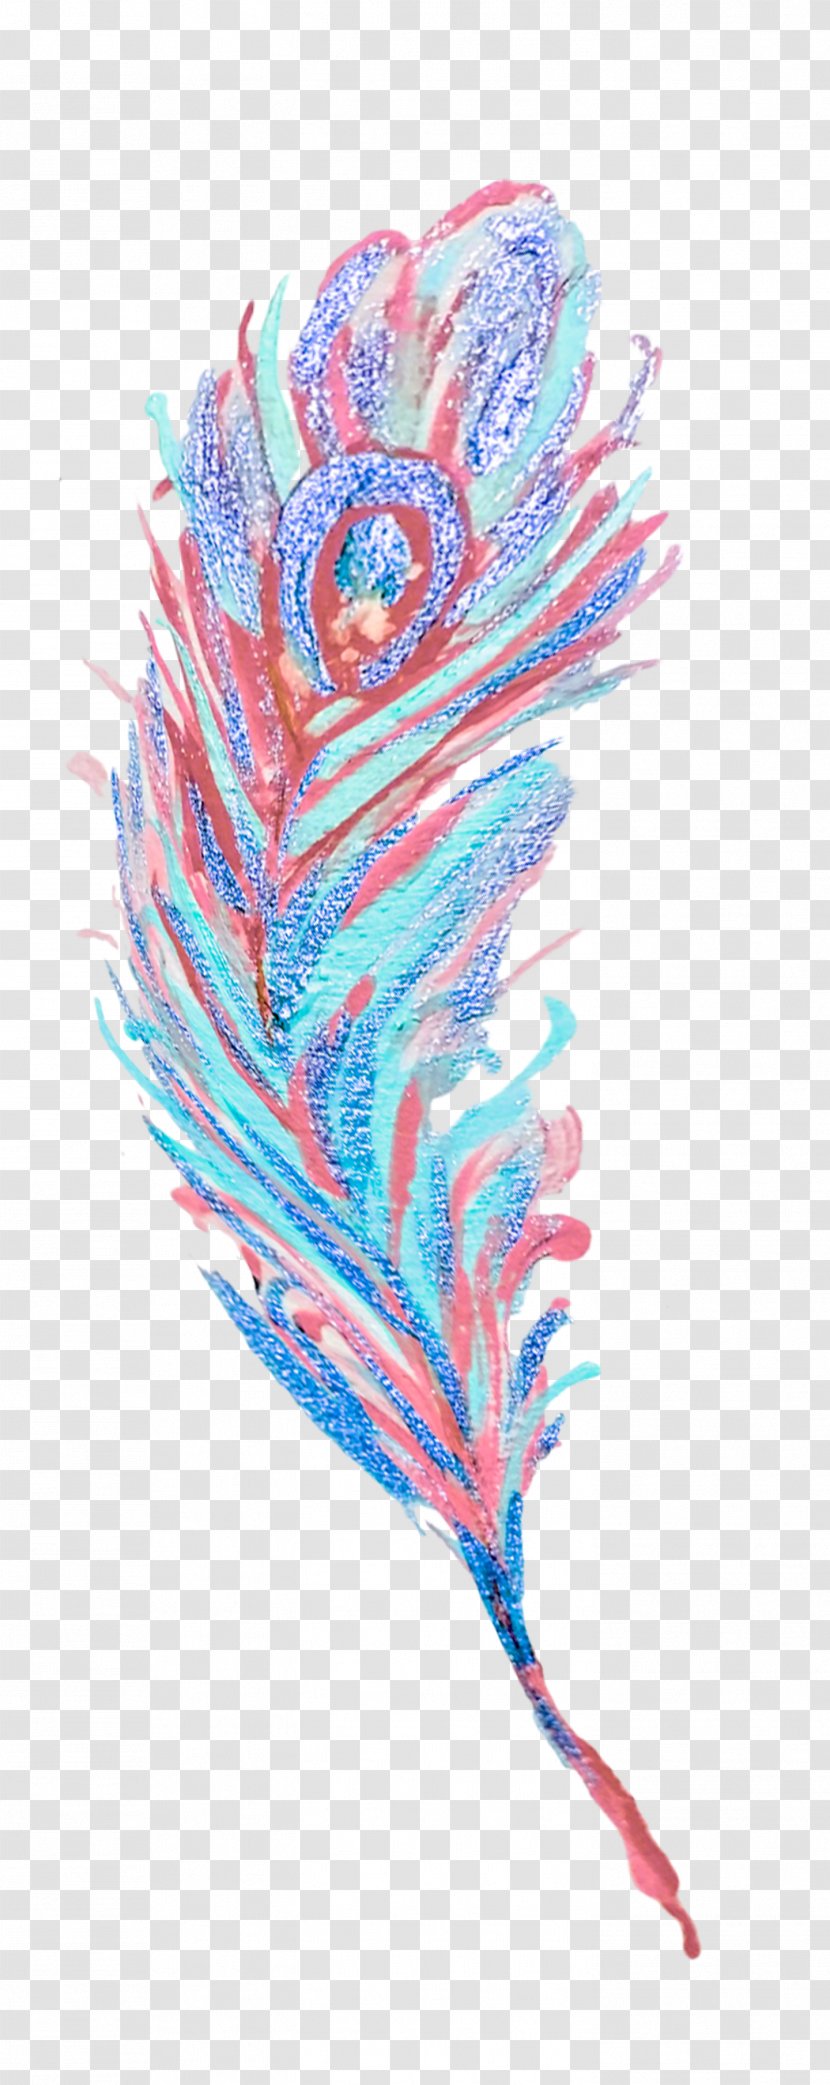 Feather Graphic Design Watercolor Painting - Fresh Color Bright Feathers Style Transparent PNG